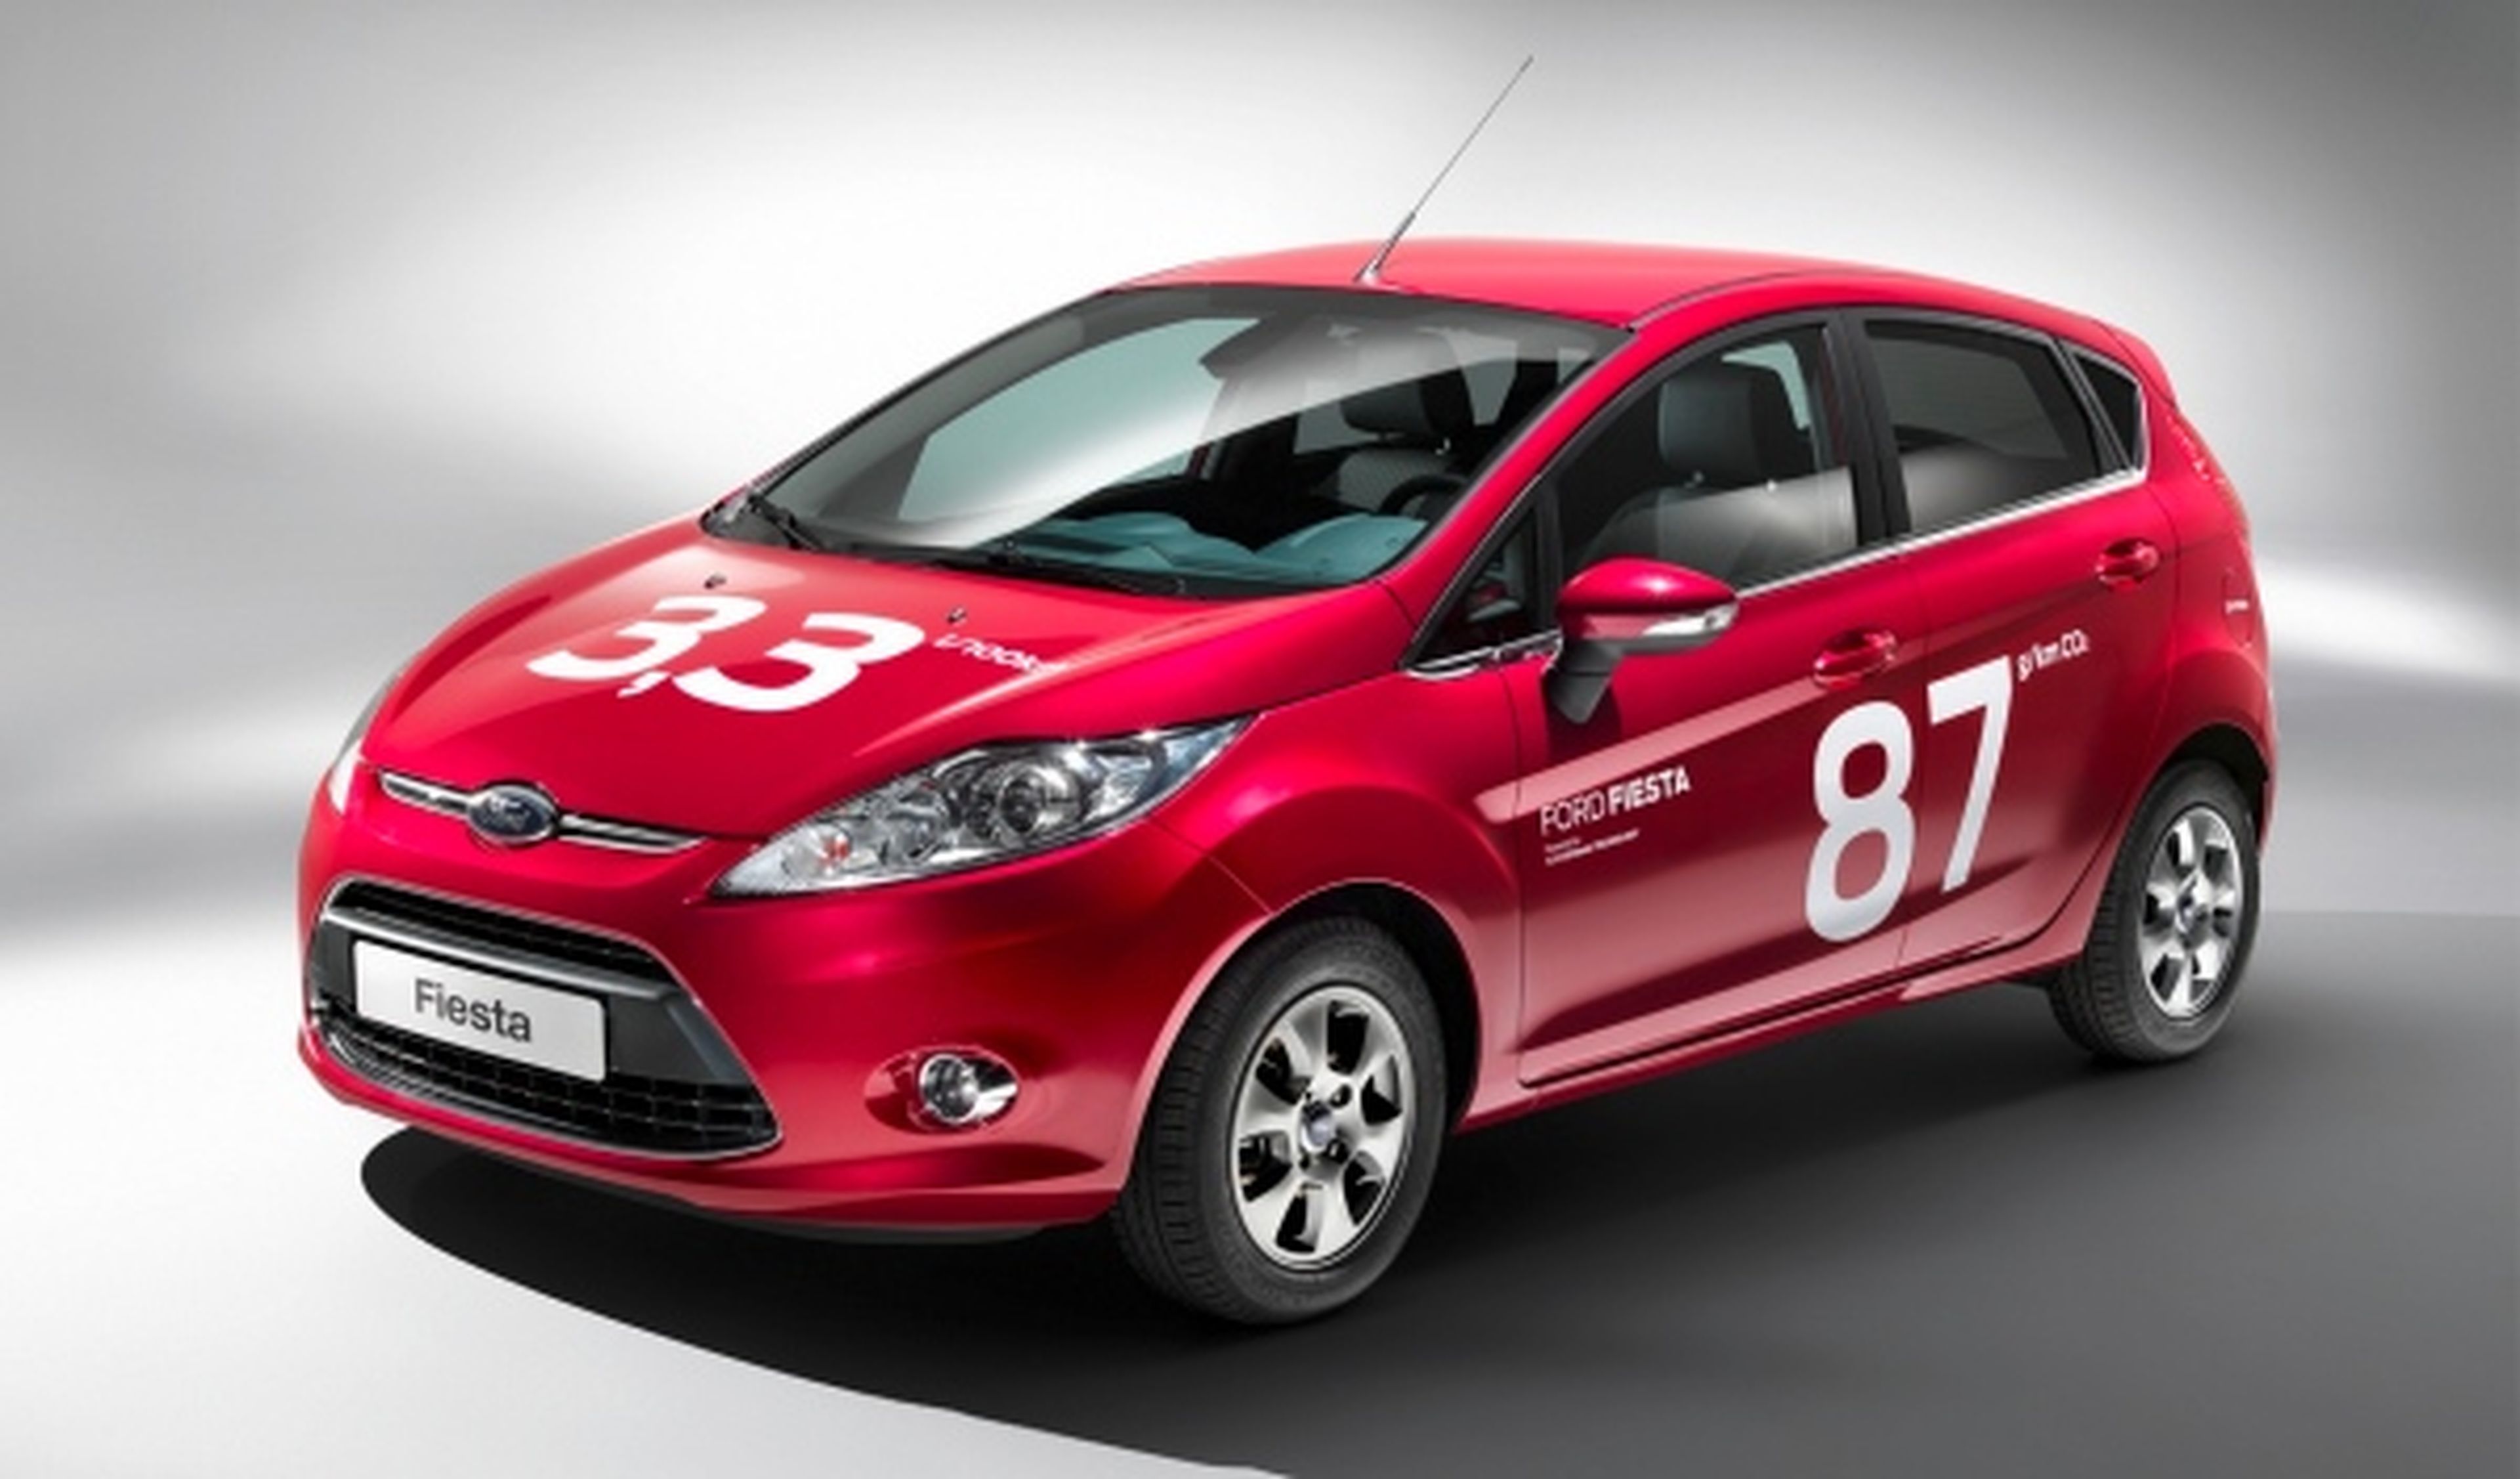 Ford Fiesta ECOnetic Technology: 3.3 l/100 km